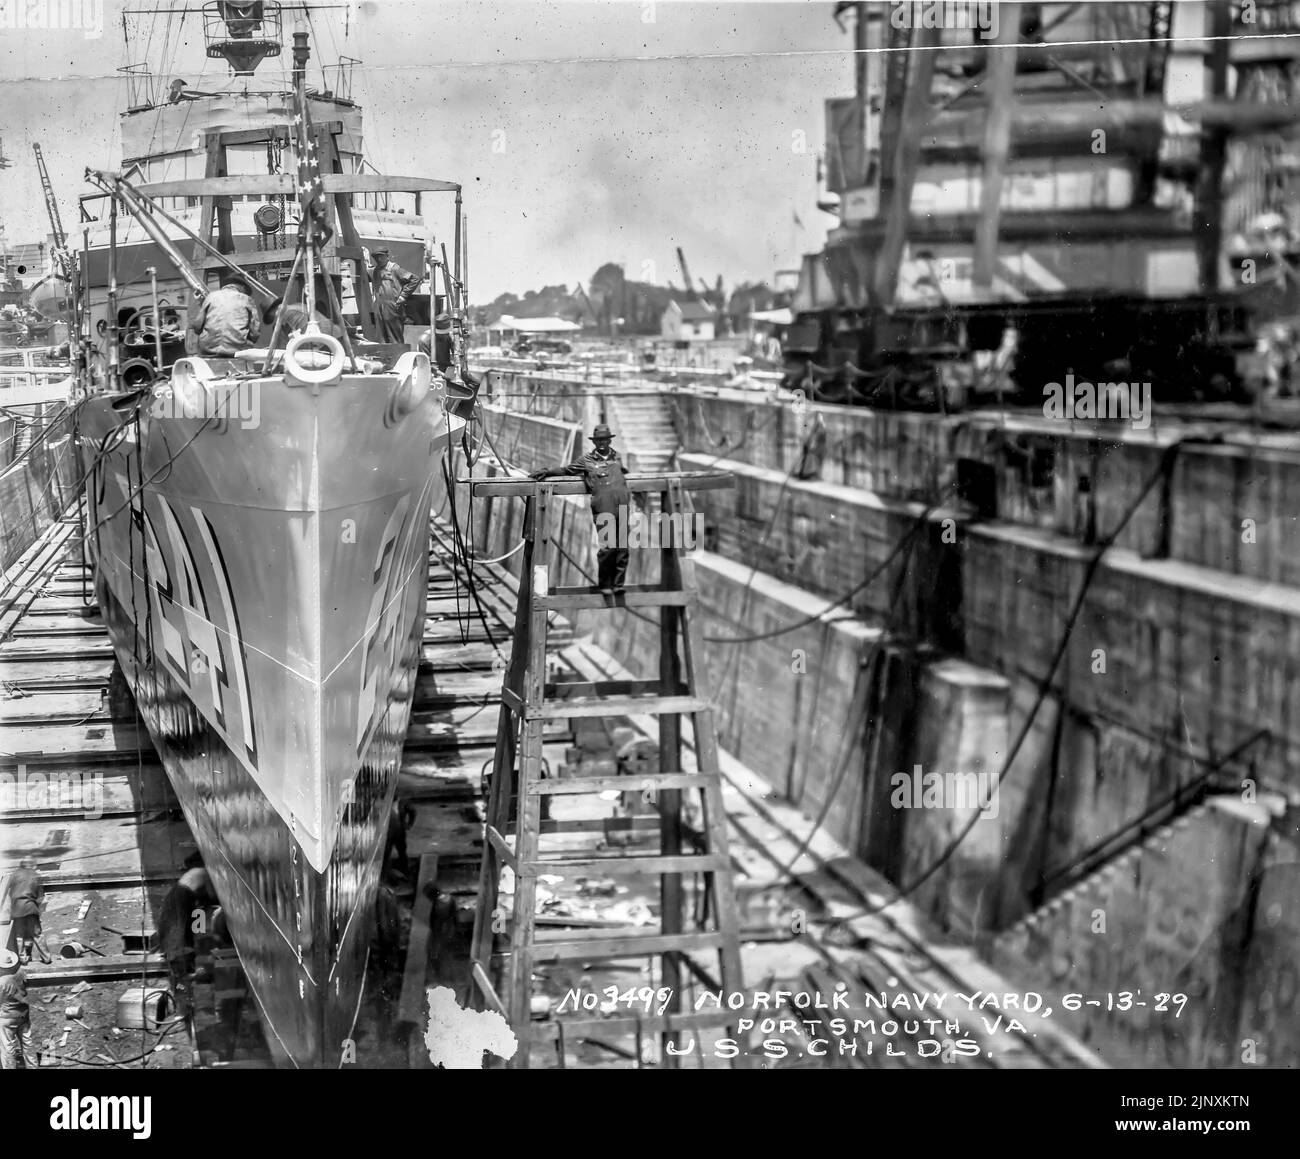 Bow first view of USS CHILDS ( DD-241 / AVP-14 / AVD-1 ) in dry dock June  13 1929 for repairs and replacement of the bow following the collision with a schooner on April 4 1929  http://www.navsource.org/archives/05/241.htm https://catalog.archives.gov/id/52560599 Stock Photo